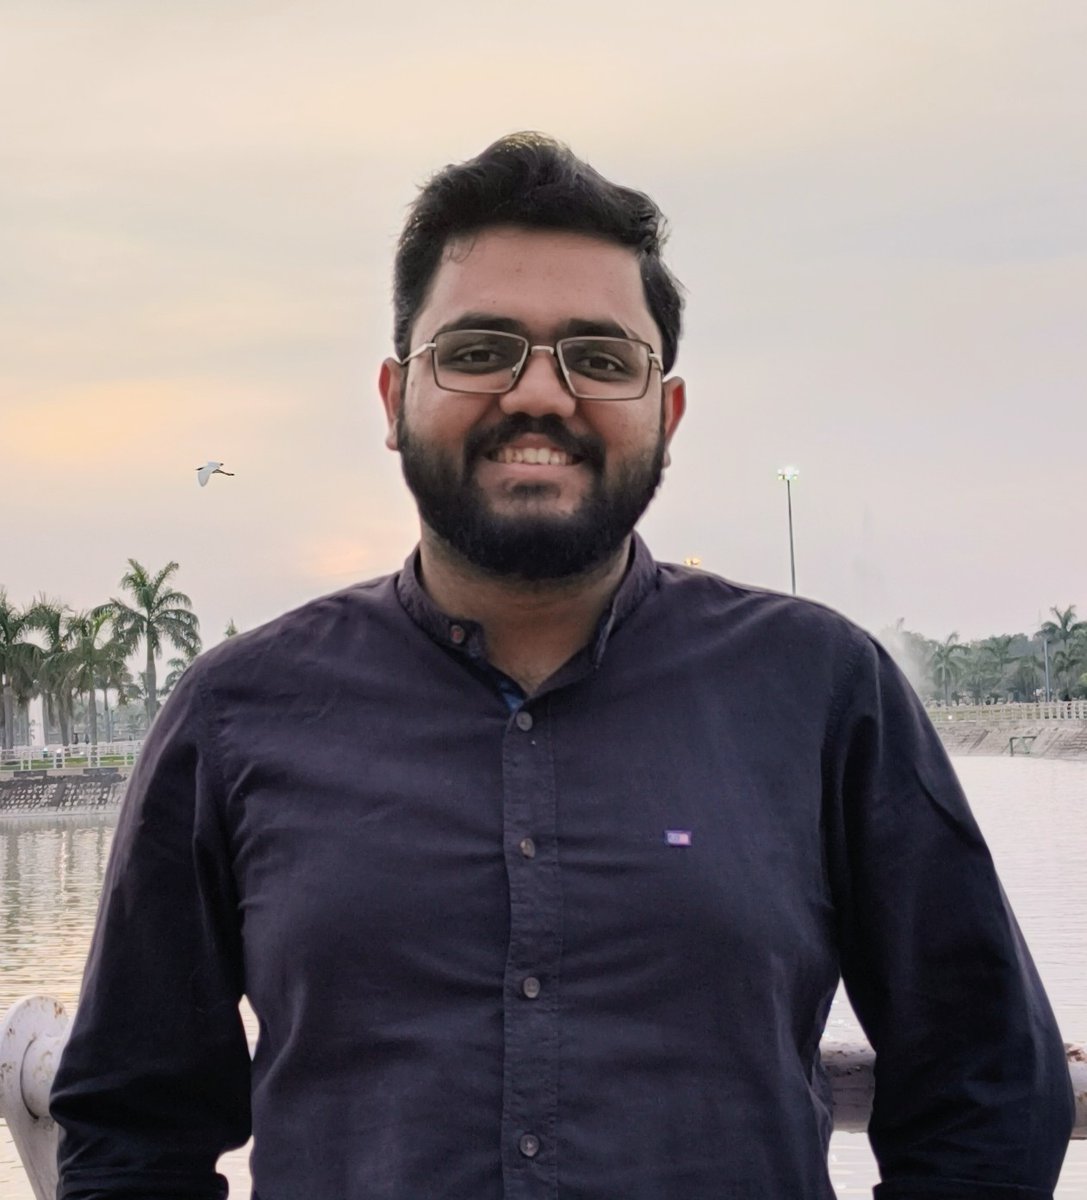 We congratulate Jyotirmay Srivastava, a PhD student in the lab of Dr Poonam Thakur for receiving the Visiting Scholar Award from Parkinson's foundation, USA. The award will facilitate a research visit to @UABNews. @js_neuro @poonam_thakur6 @ParkinsonDotOrg